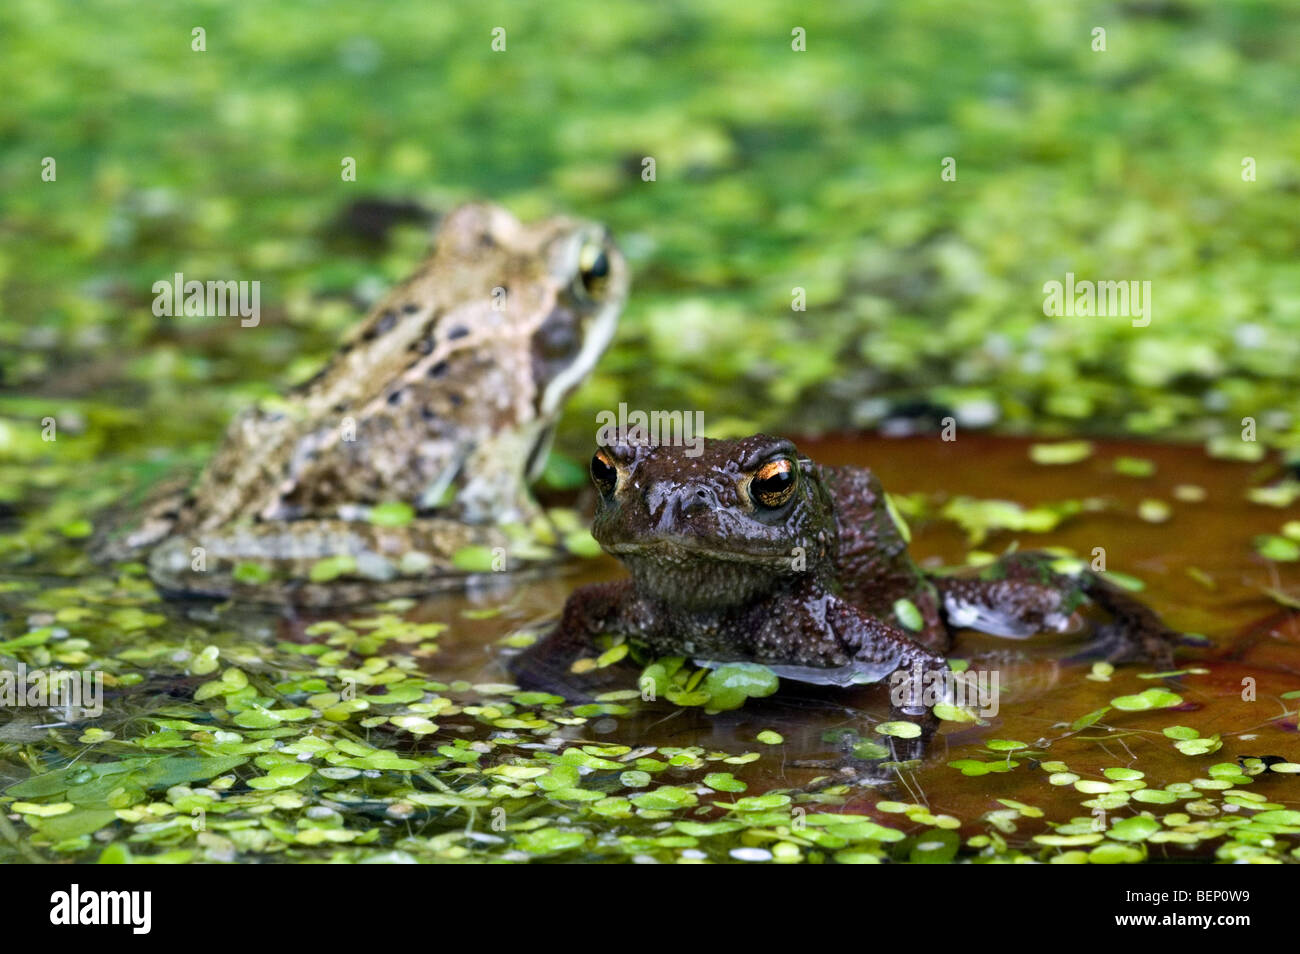 Juvenile common toad (Bufo bufo) and European common brown frog (Rana temporaria) on lily pad in pond Stock Photo